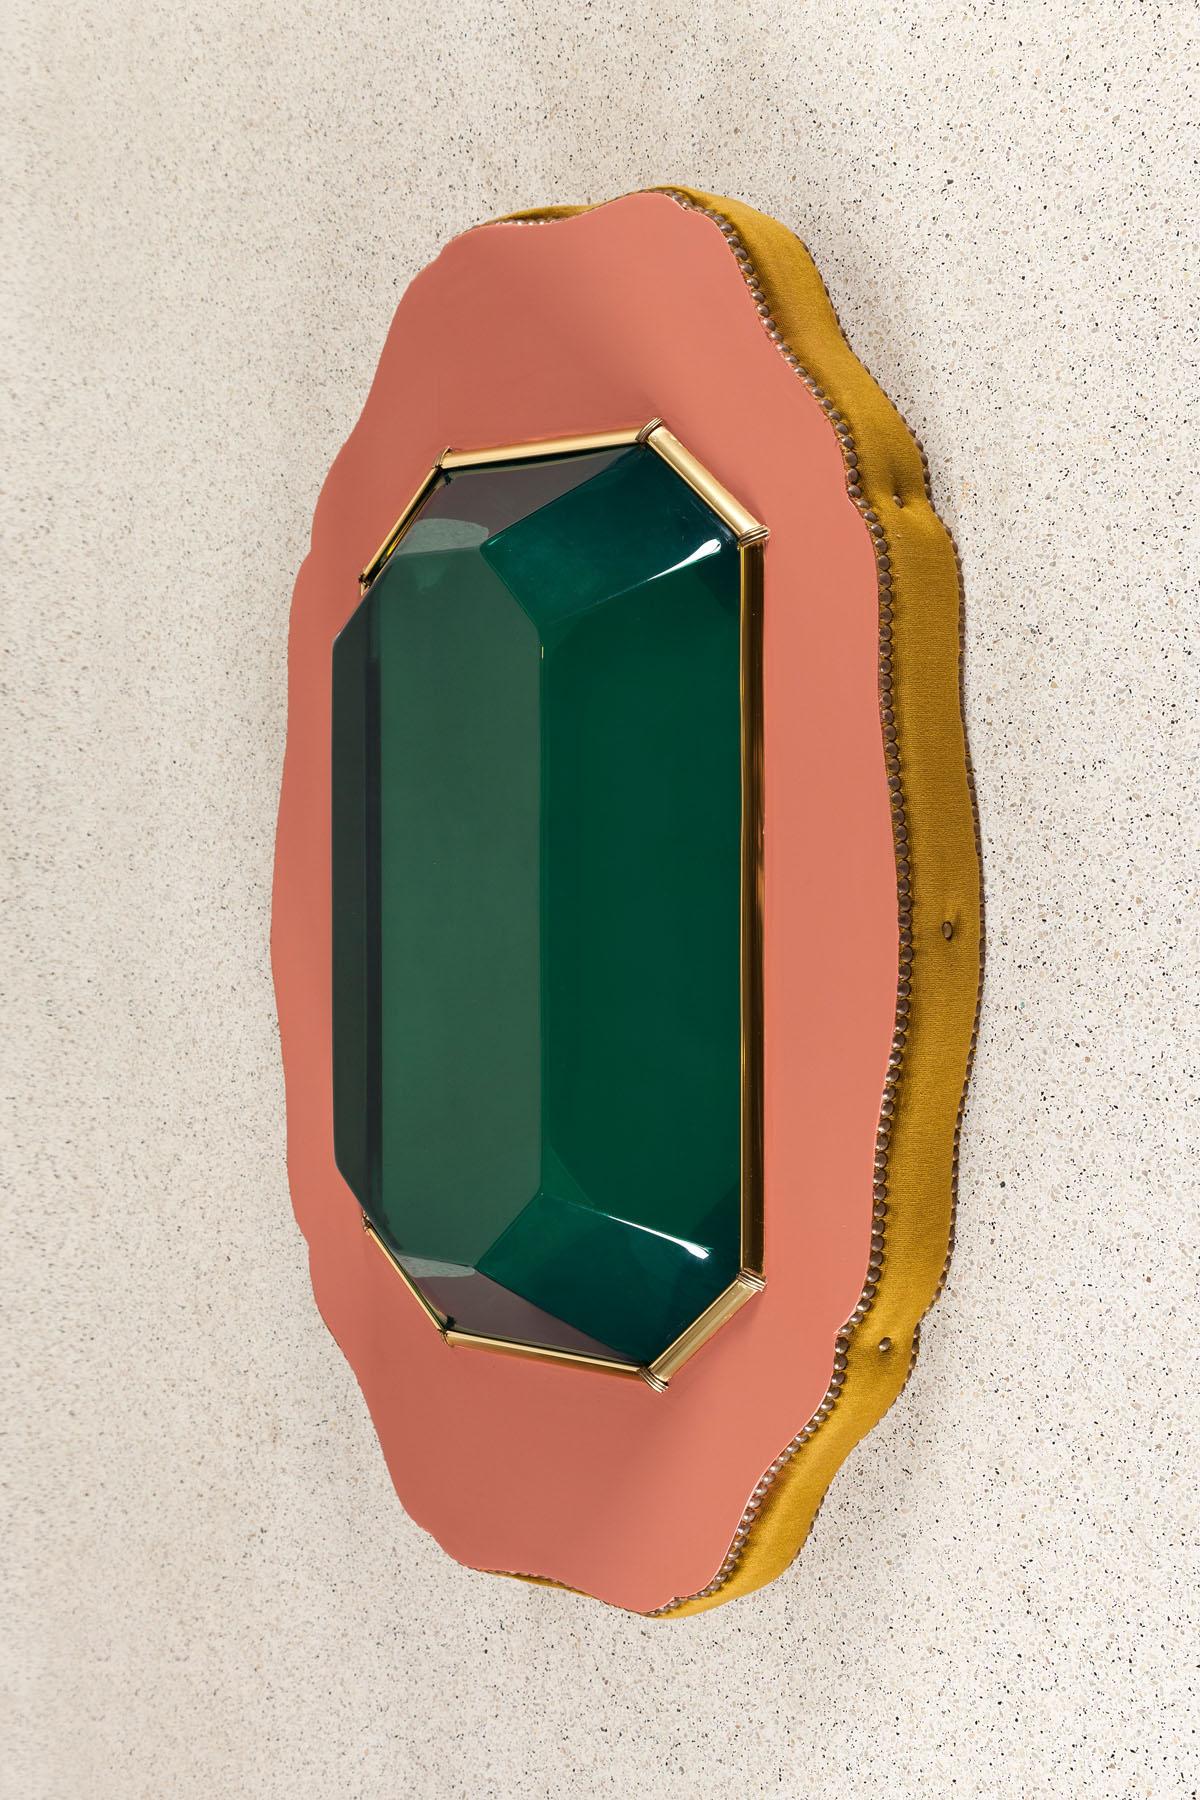 Jewel wall sculpture in wood, acrylic, bronze and velvet by Daniel Basso, Argentina, 2022.

Daniel Basso, Mar del Plata 1974.
He studied painting at the Higher School of Visual Arts in Mar del Plata. He has been working in the development of his